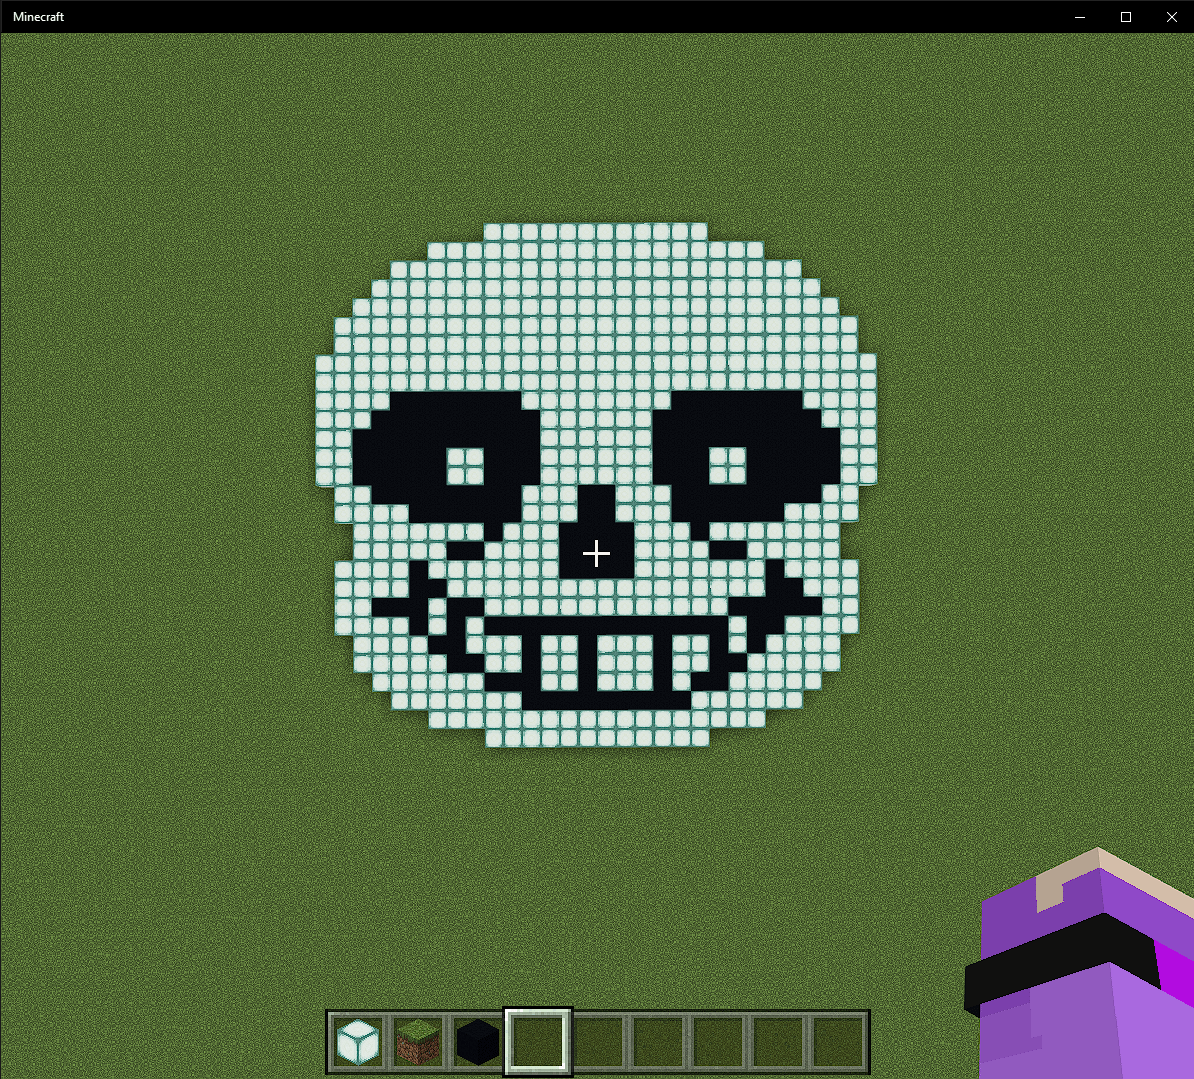 Minecraft Memes - "Fill Sans with Beds"